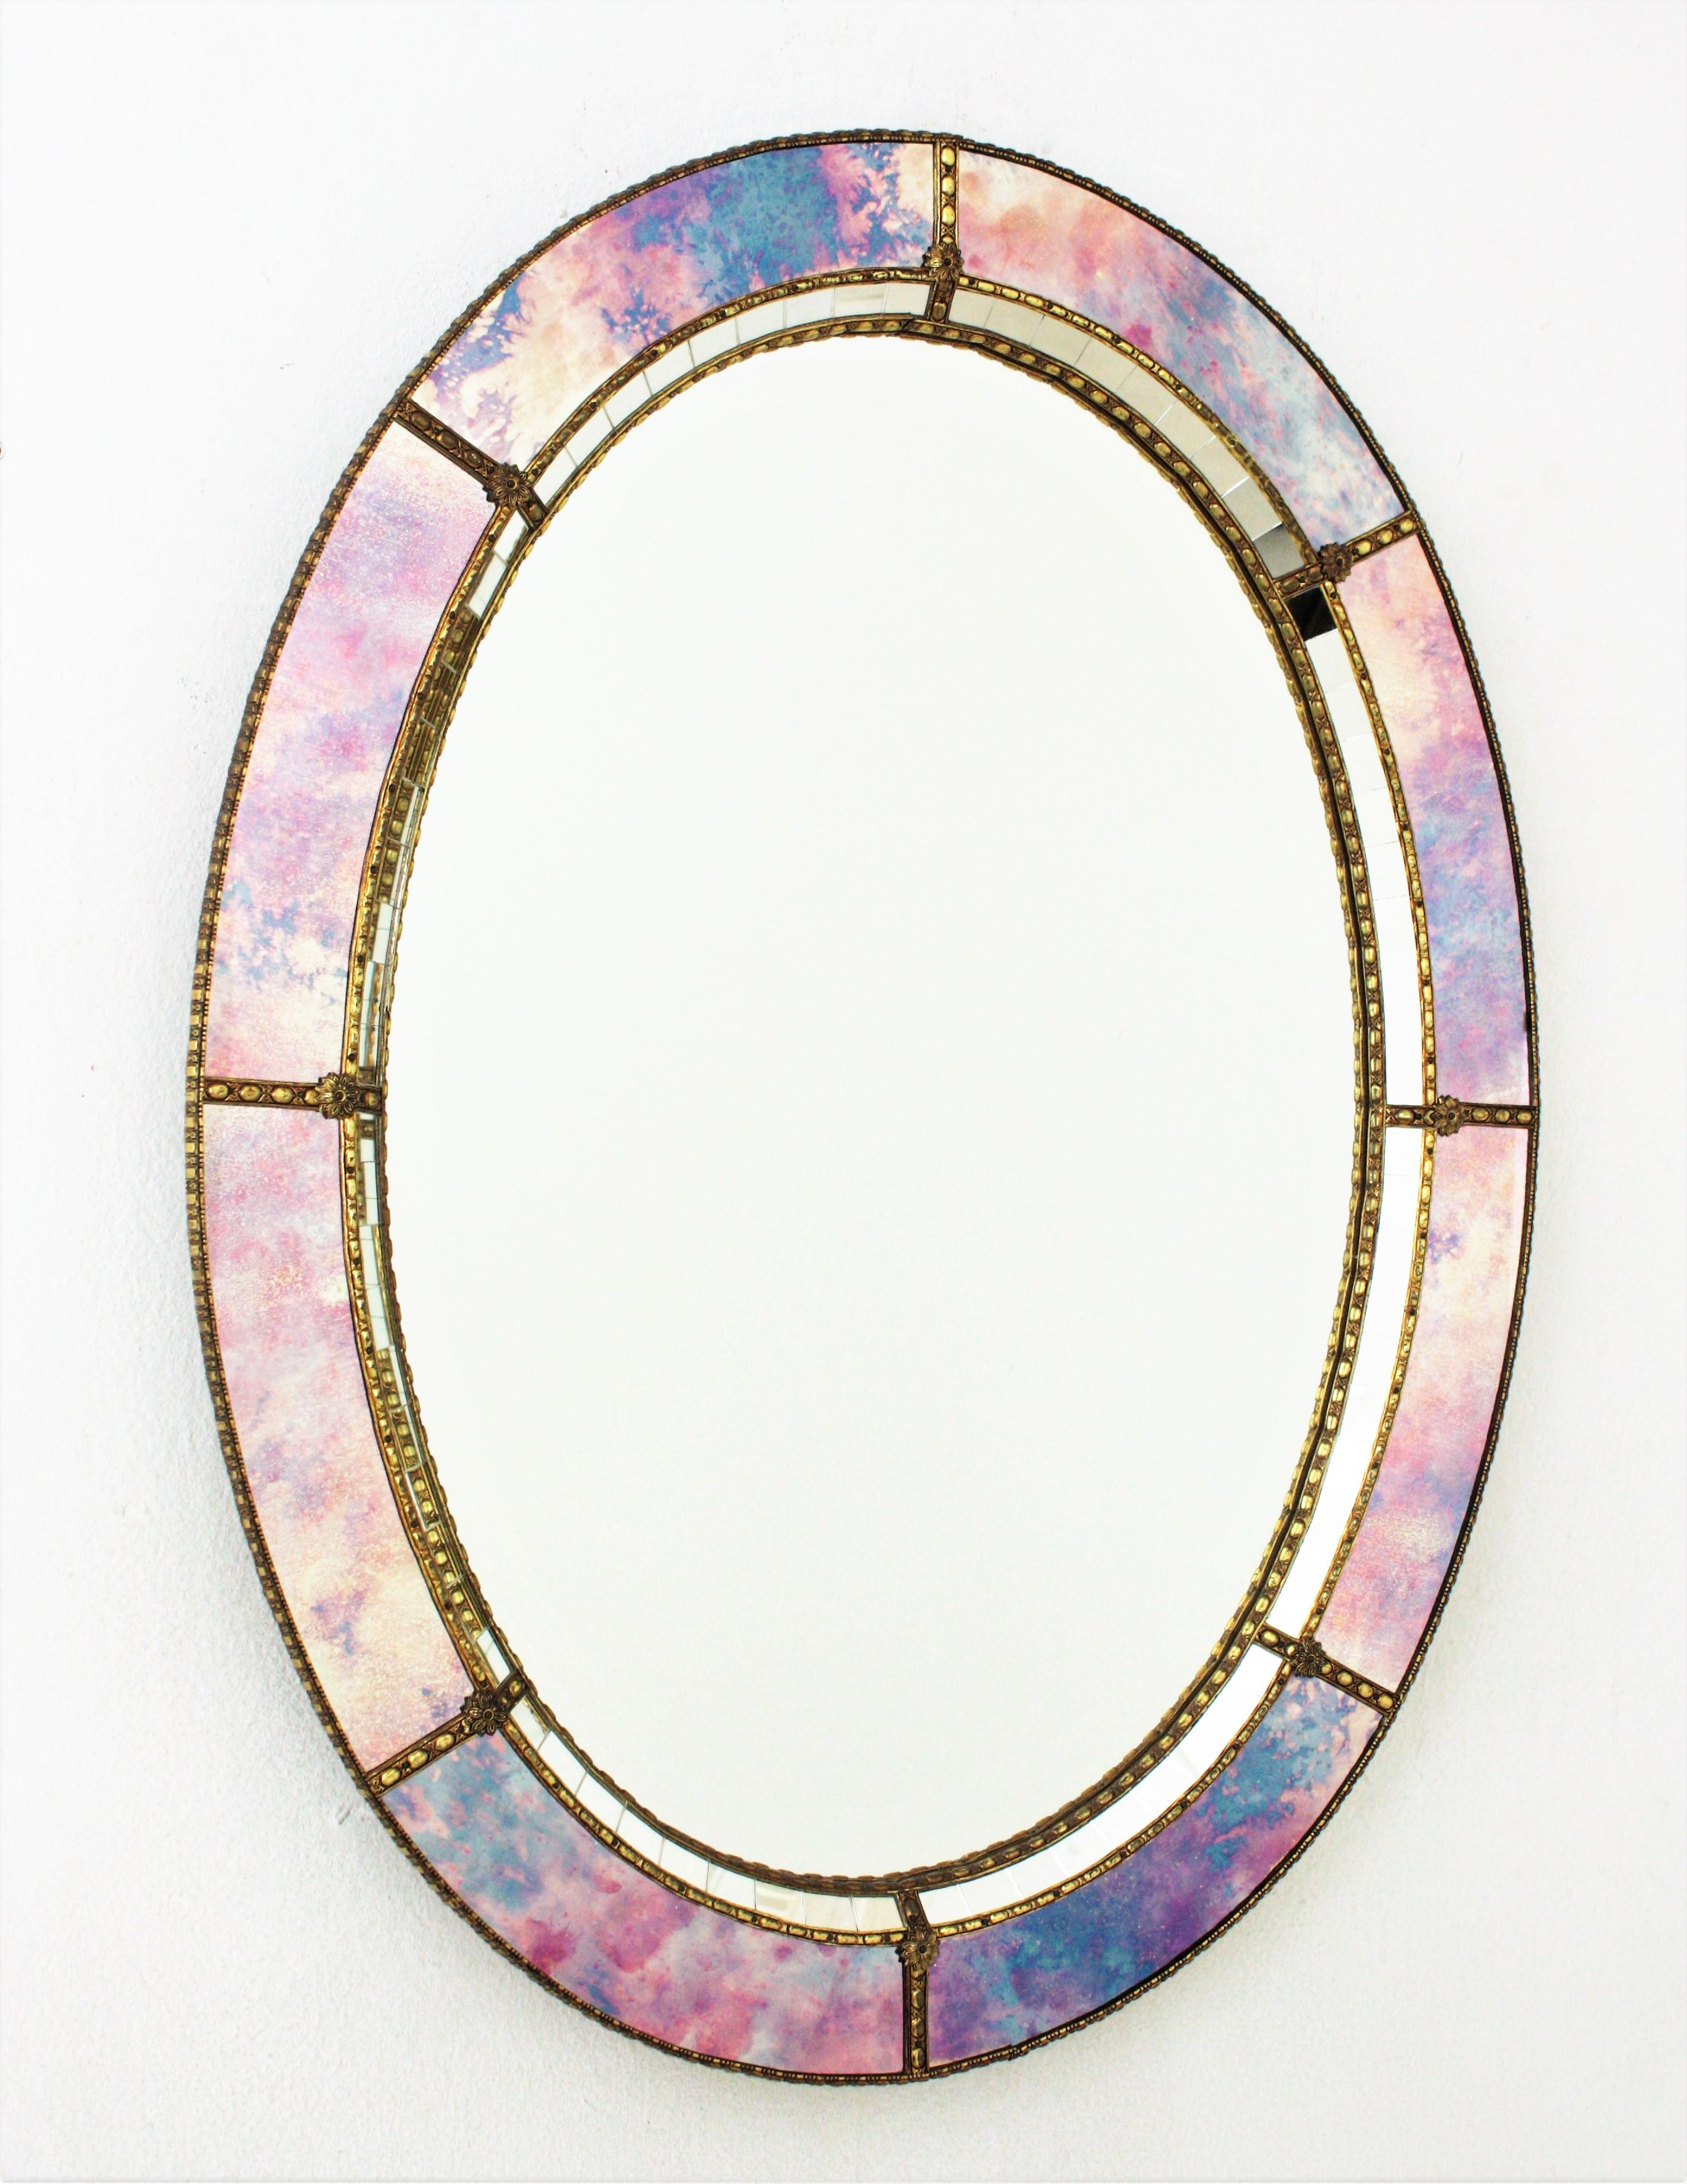 Elegant Venetian style Hollywood Regency oval mirror with iridiscent and mirror glass panels. Spain, 1960s
This glamorous mirror featuring a double layered mirror frame made of brass. Oval form with a frame that has two layers of decorative paneled